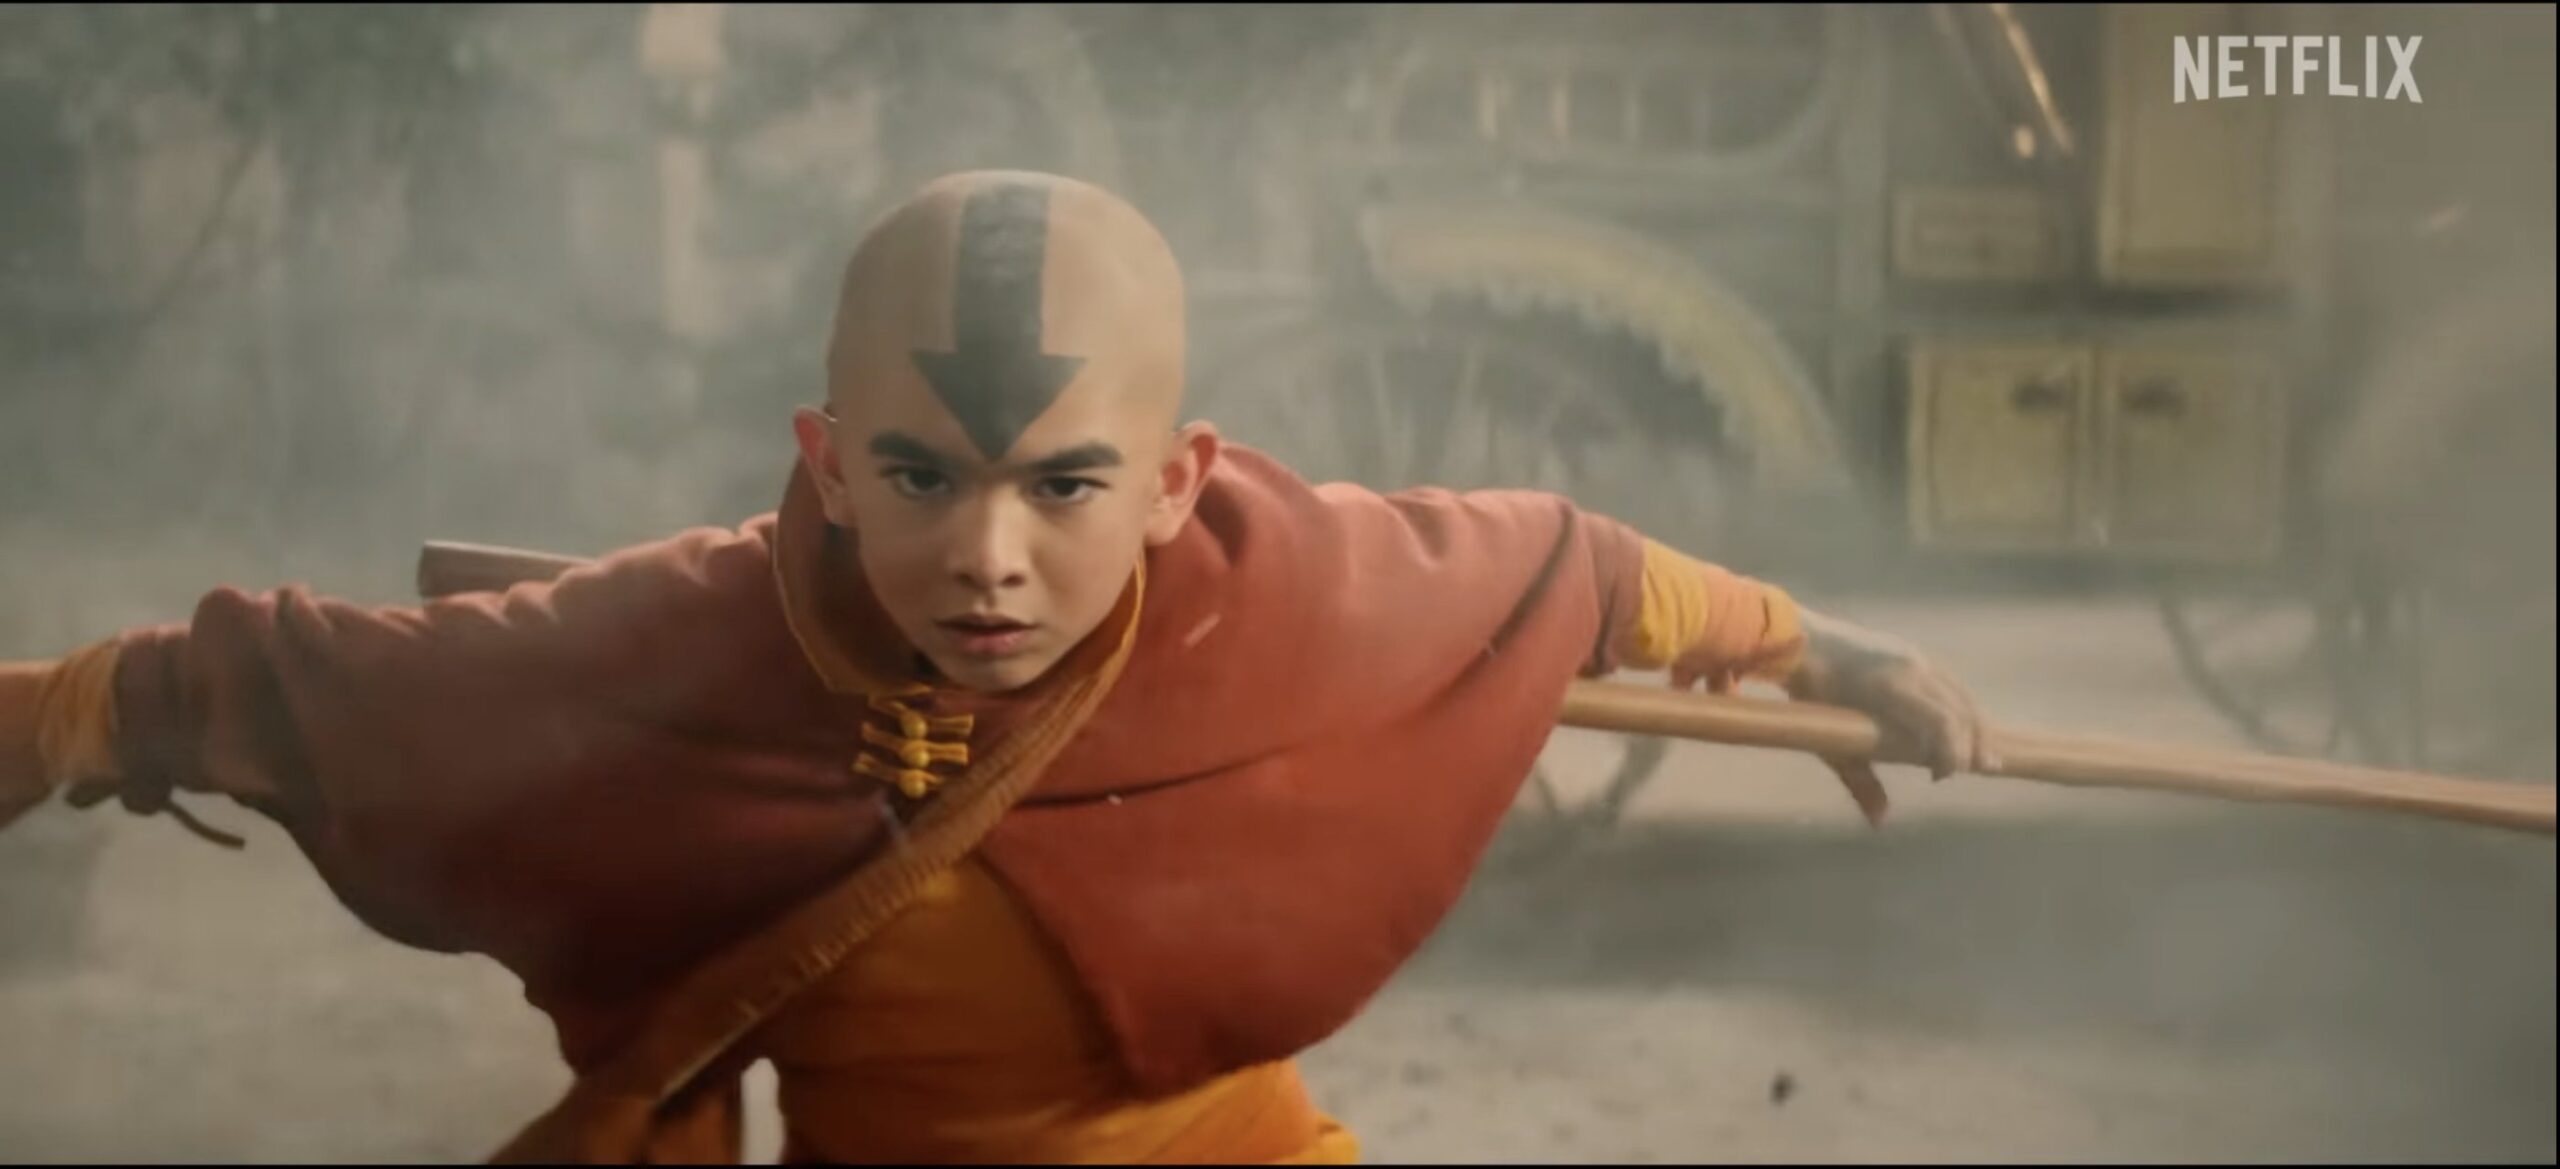 ‘Avatar: The Last Airbender’ live-action to premiere in February 2024